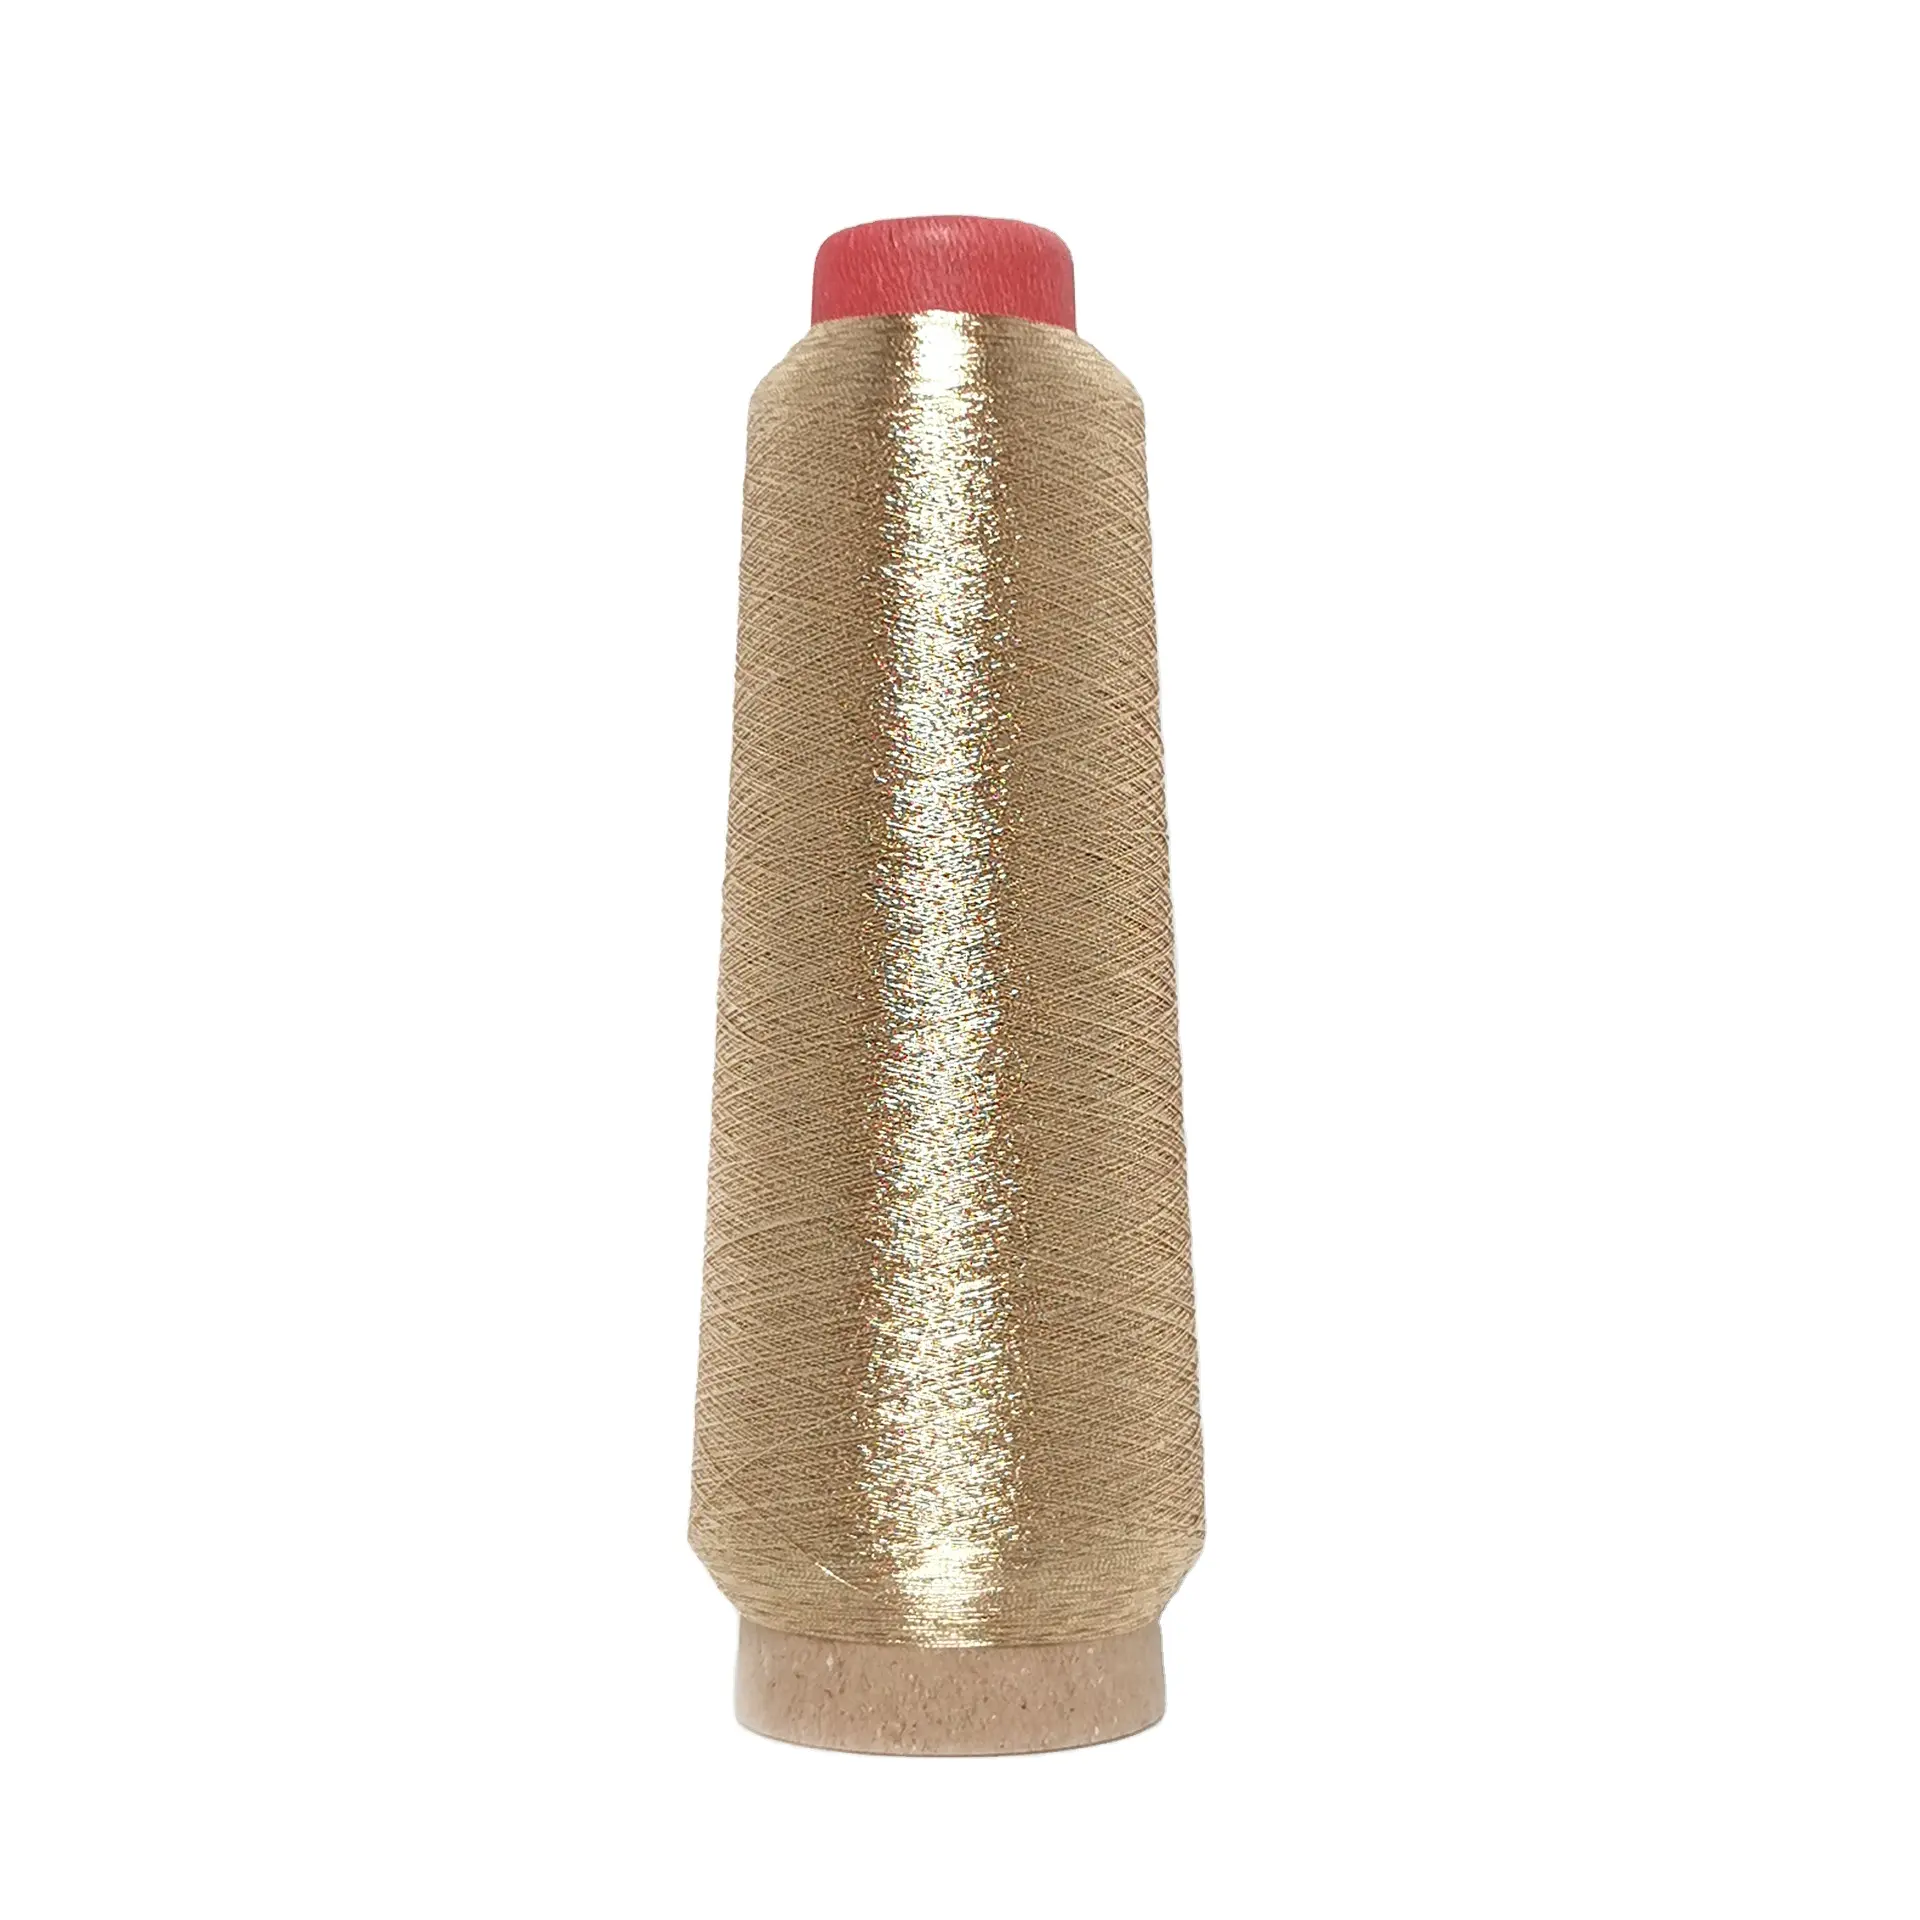 Wholesales Cheap Price 150D Golden and Silver Metallic Thread MS Type Embroidery Thread Metallic Yarn For Weaving